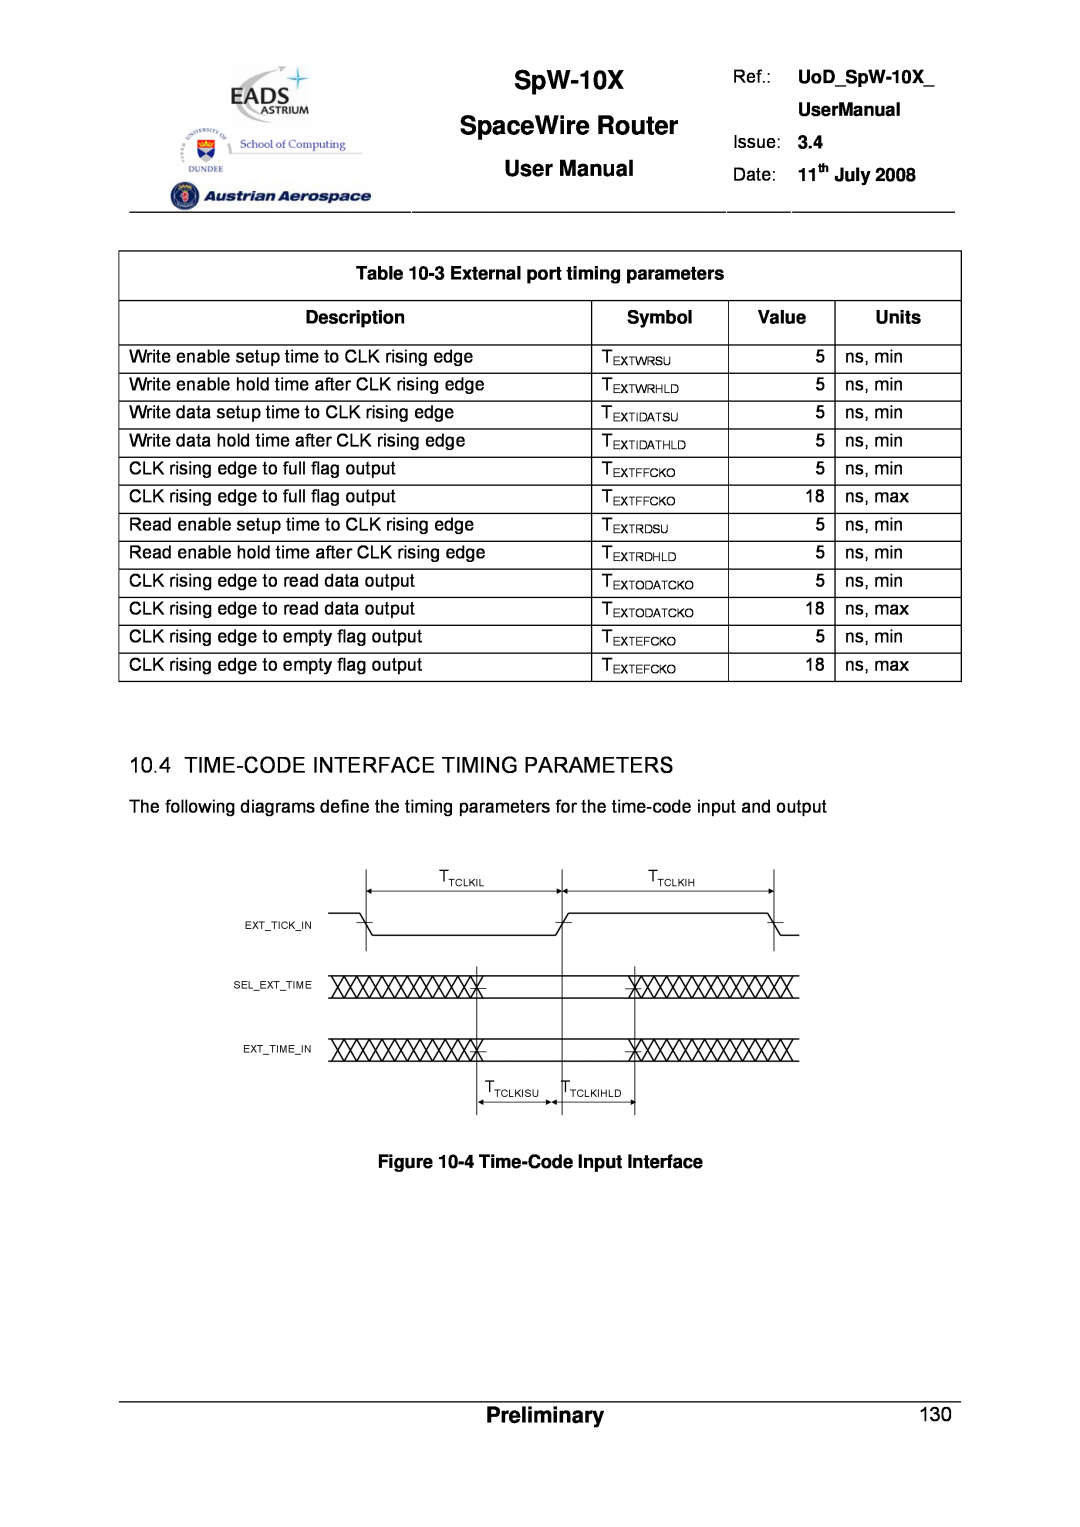 Atmel SpW-10X user manual Time-Code Interface Timing Parameters, SpaceWire Router, User Manual, Preliminary 